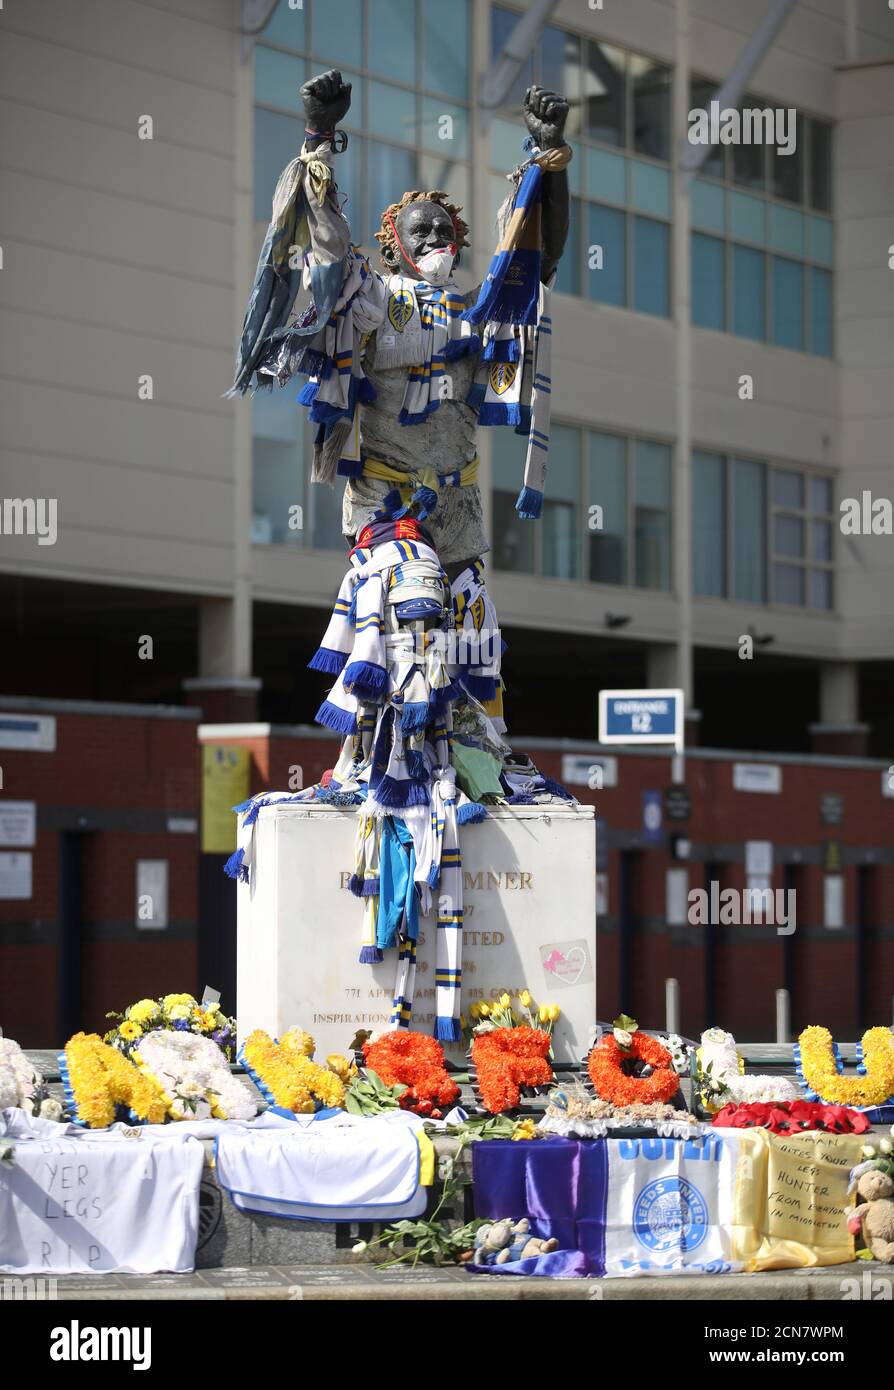 Soccer Football - Norman Hunter dies - Elland Road, Leeds, Britain - April  17, 2020. Tributes and scarves for former Leeds United player Norman Hunter  are seen on the Billy Bremner statue